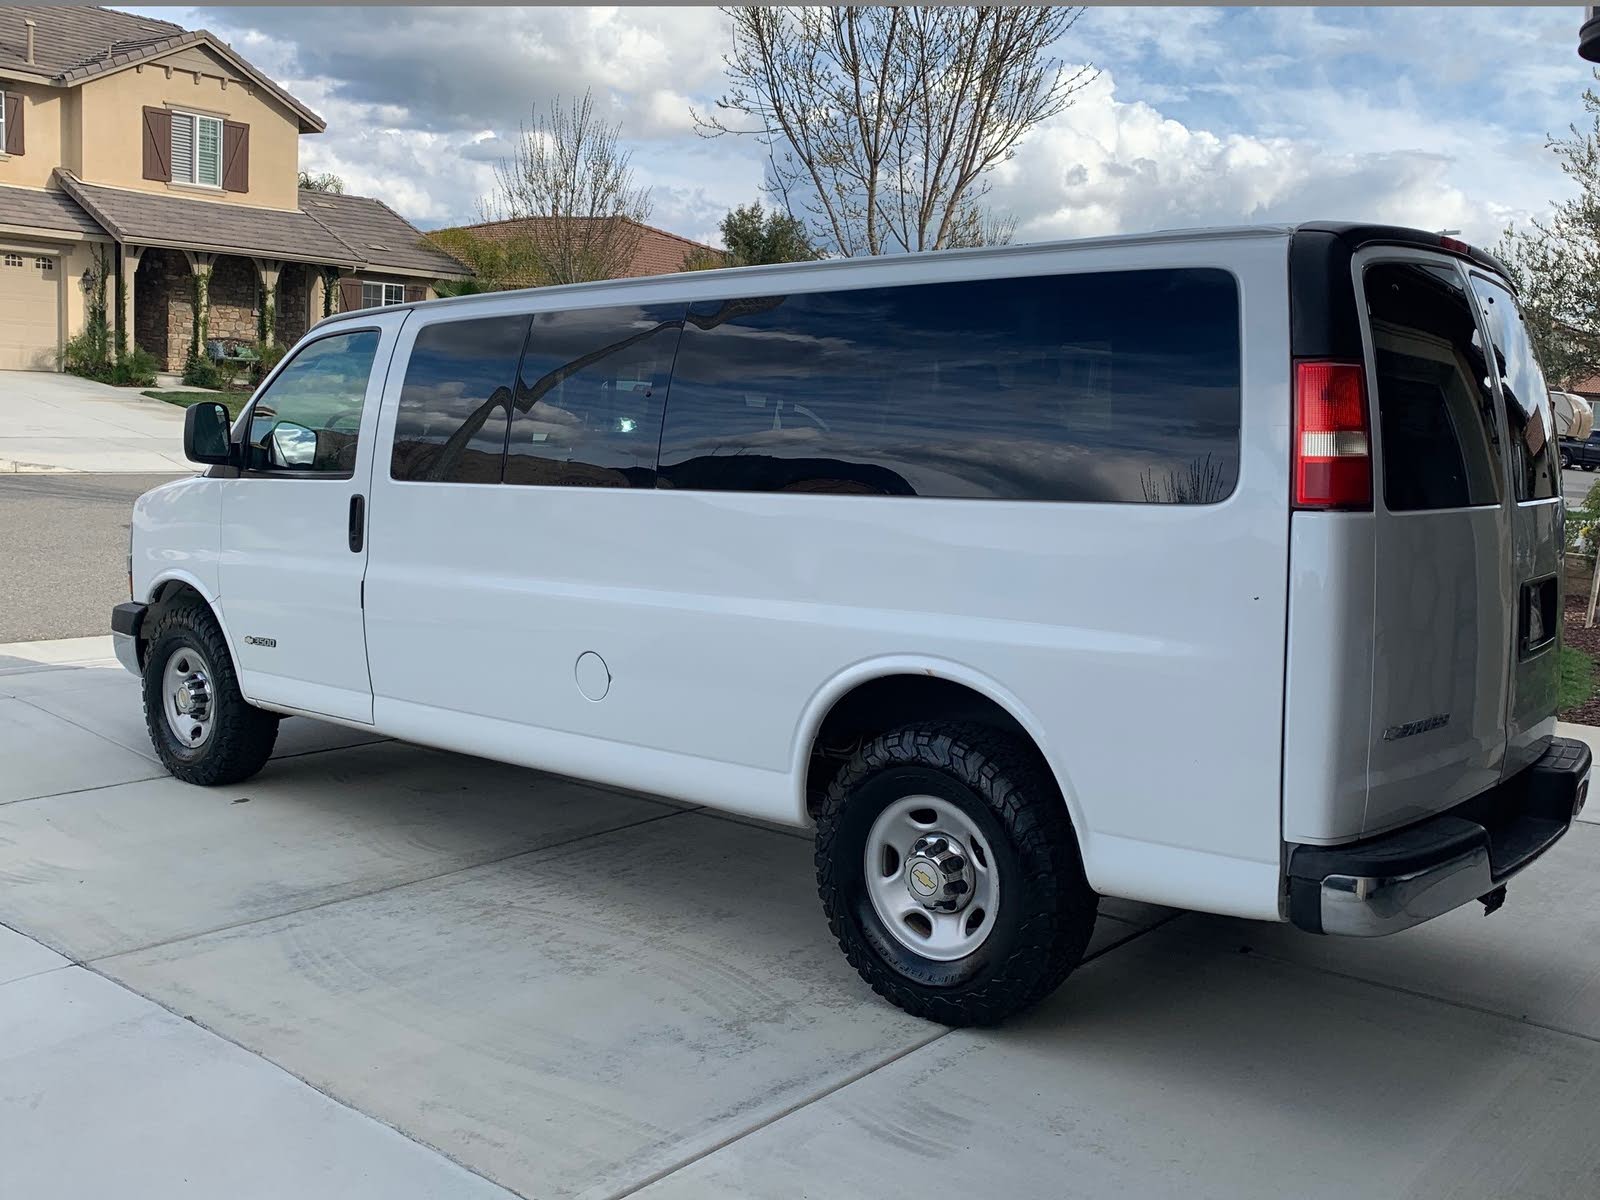 chevy express